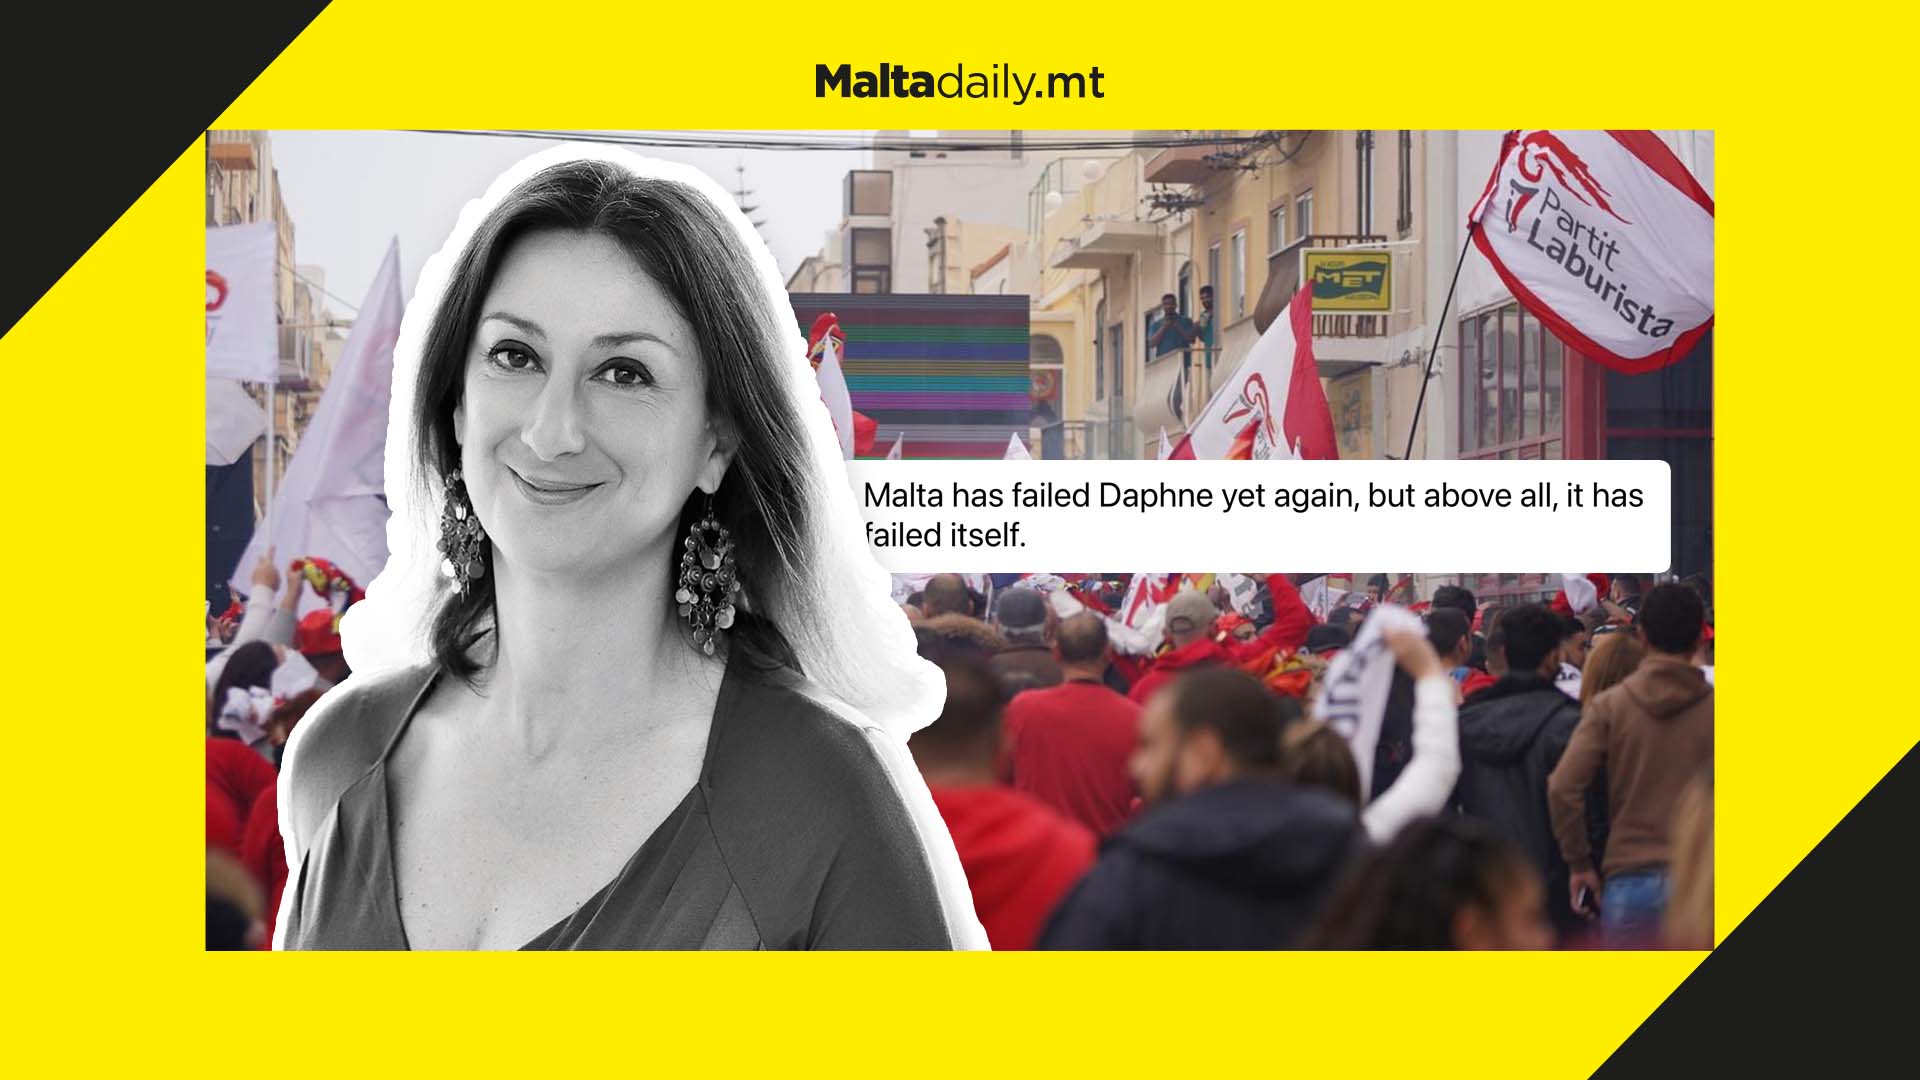 Malta has failed Daphne and itself, says sister of assassinated journalist